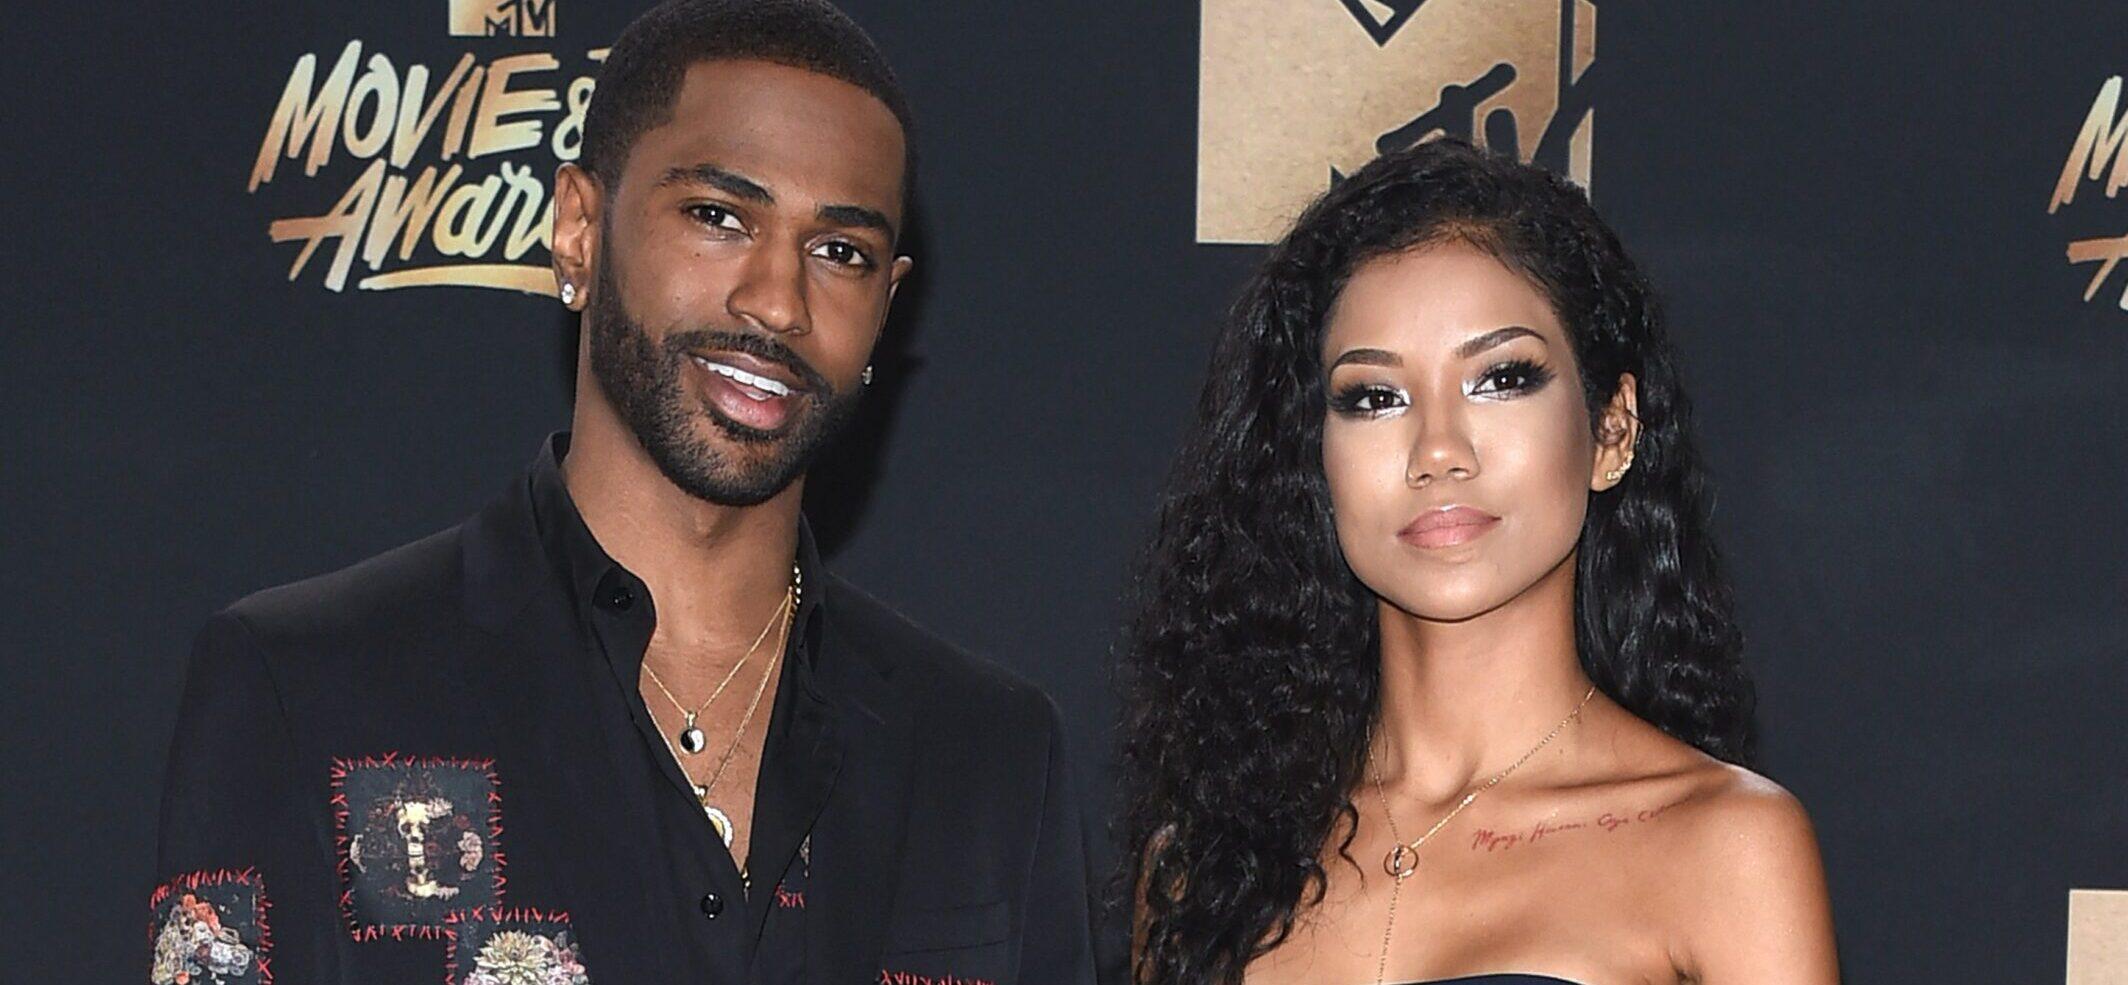 Big Sean & Jhené Aiko Granted 5-Year Restraining Order Against Obsessed Fan